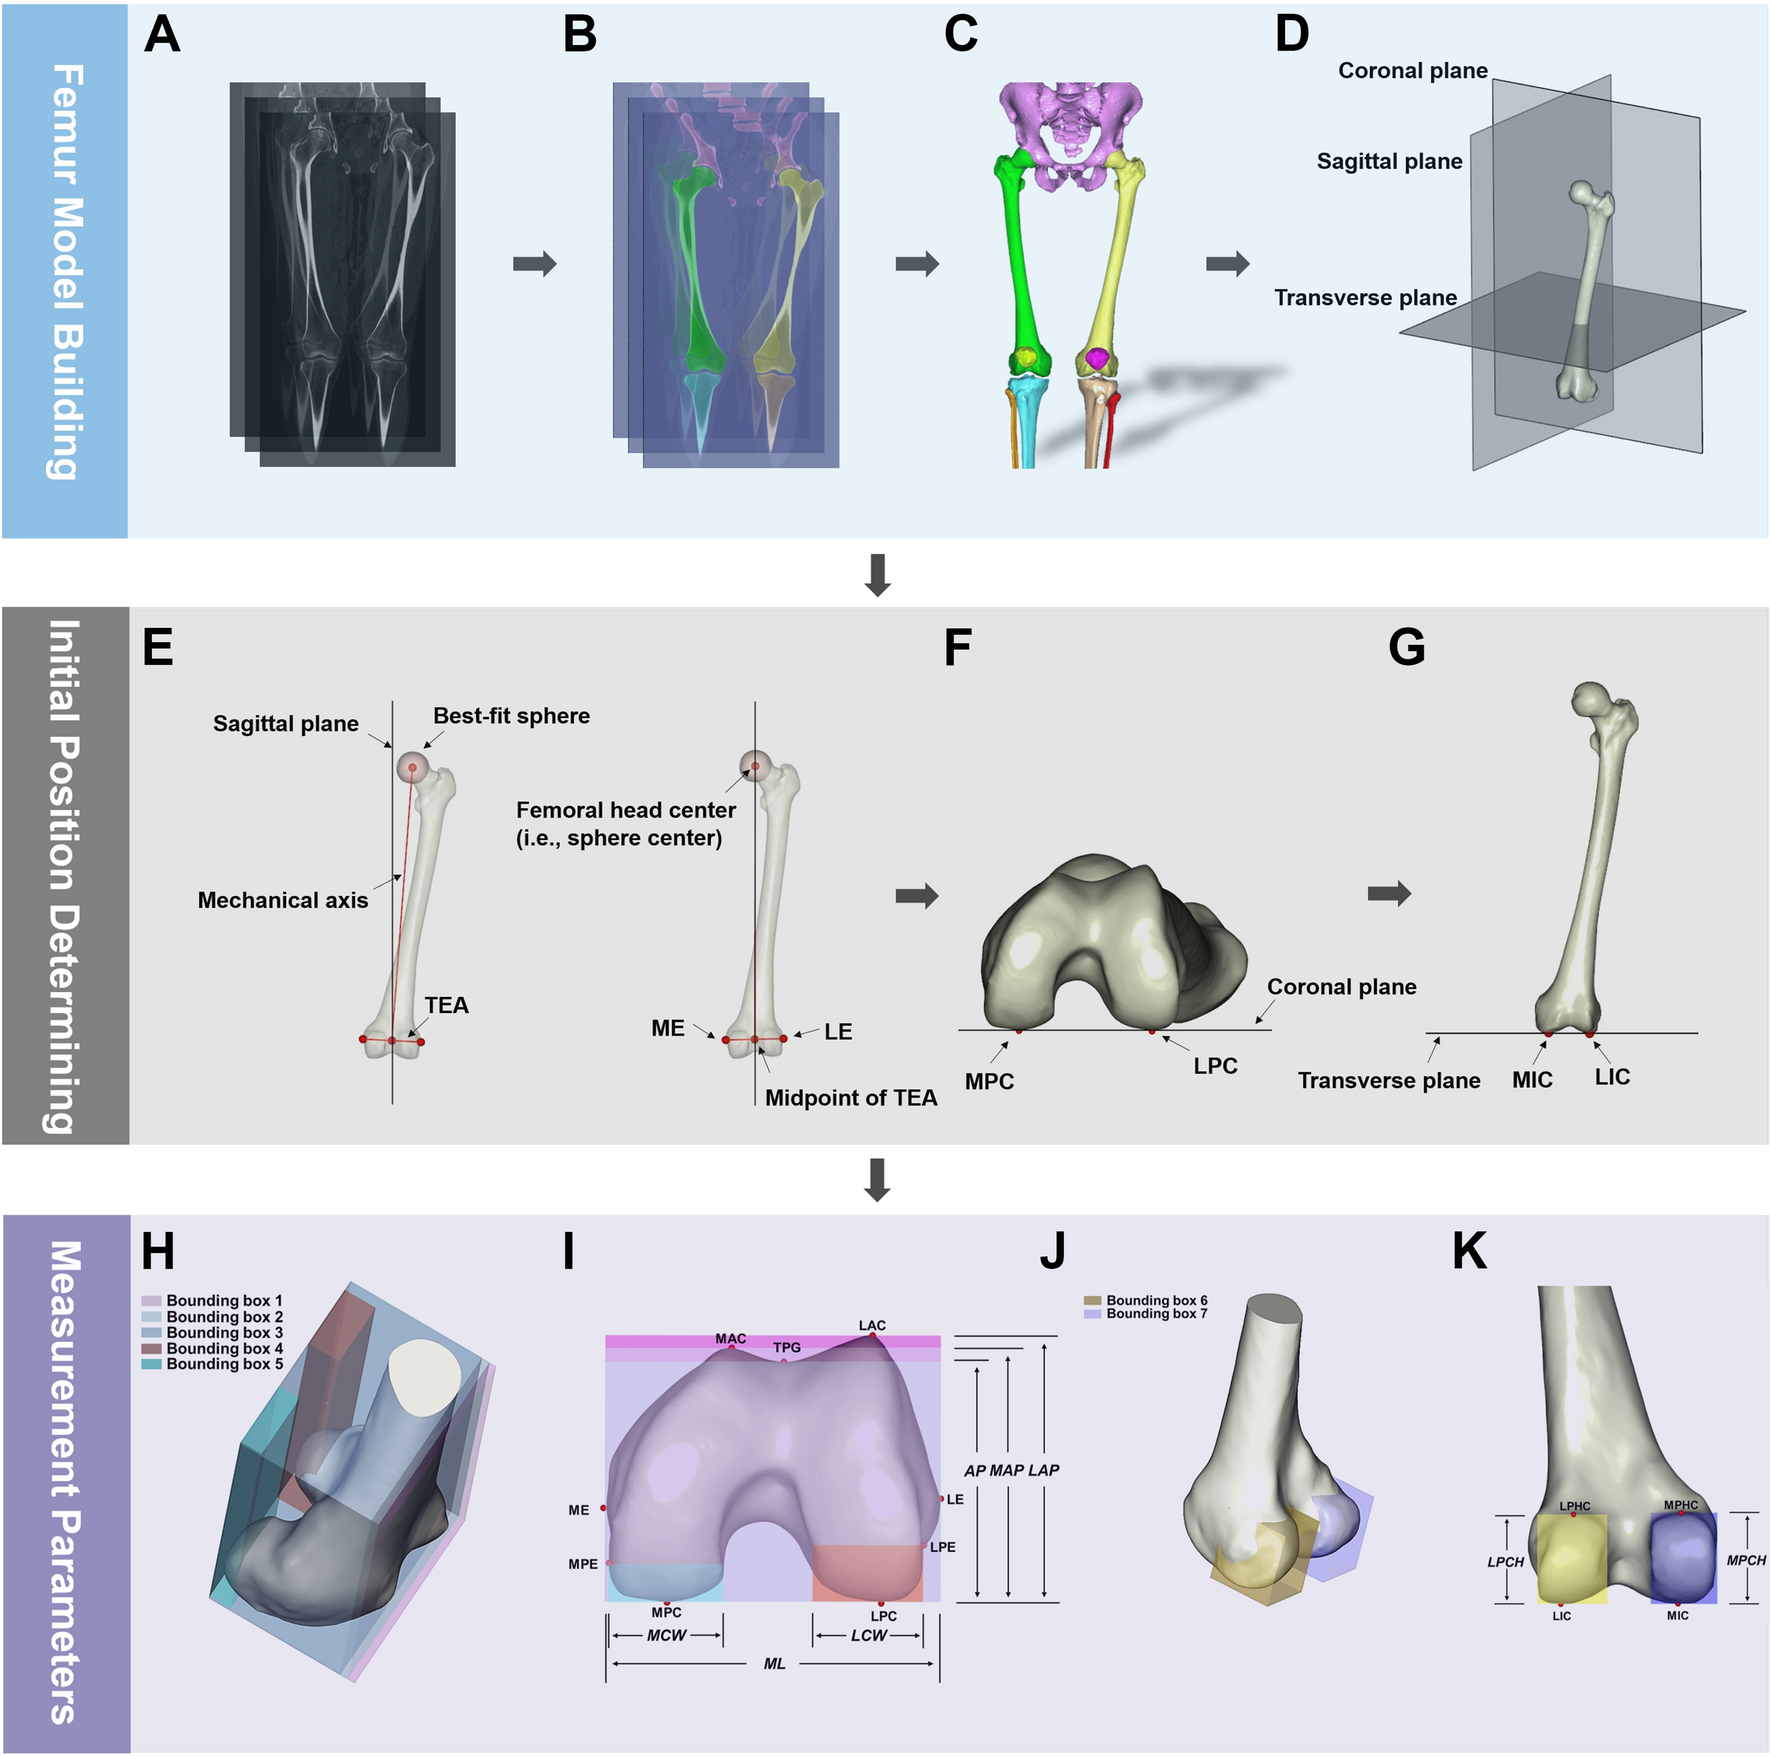 Five or more gender- and size-diverse customizations of distal femur prostheses are needed to improve fit for Chinese knees